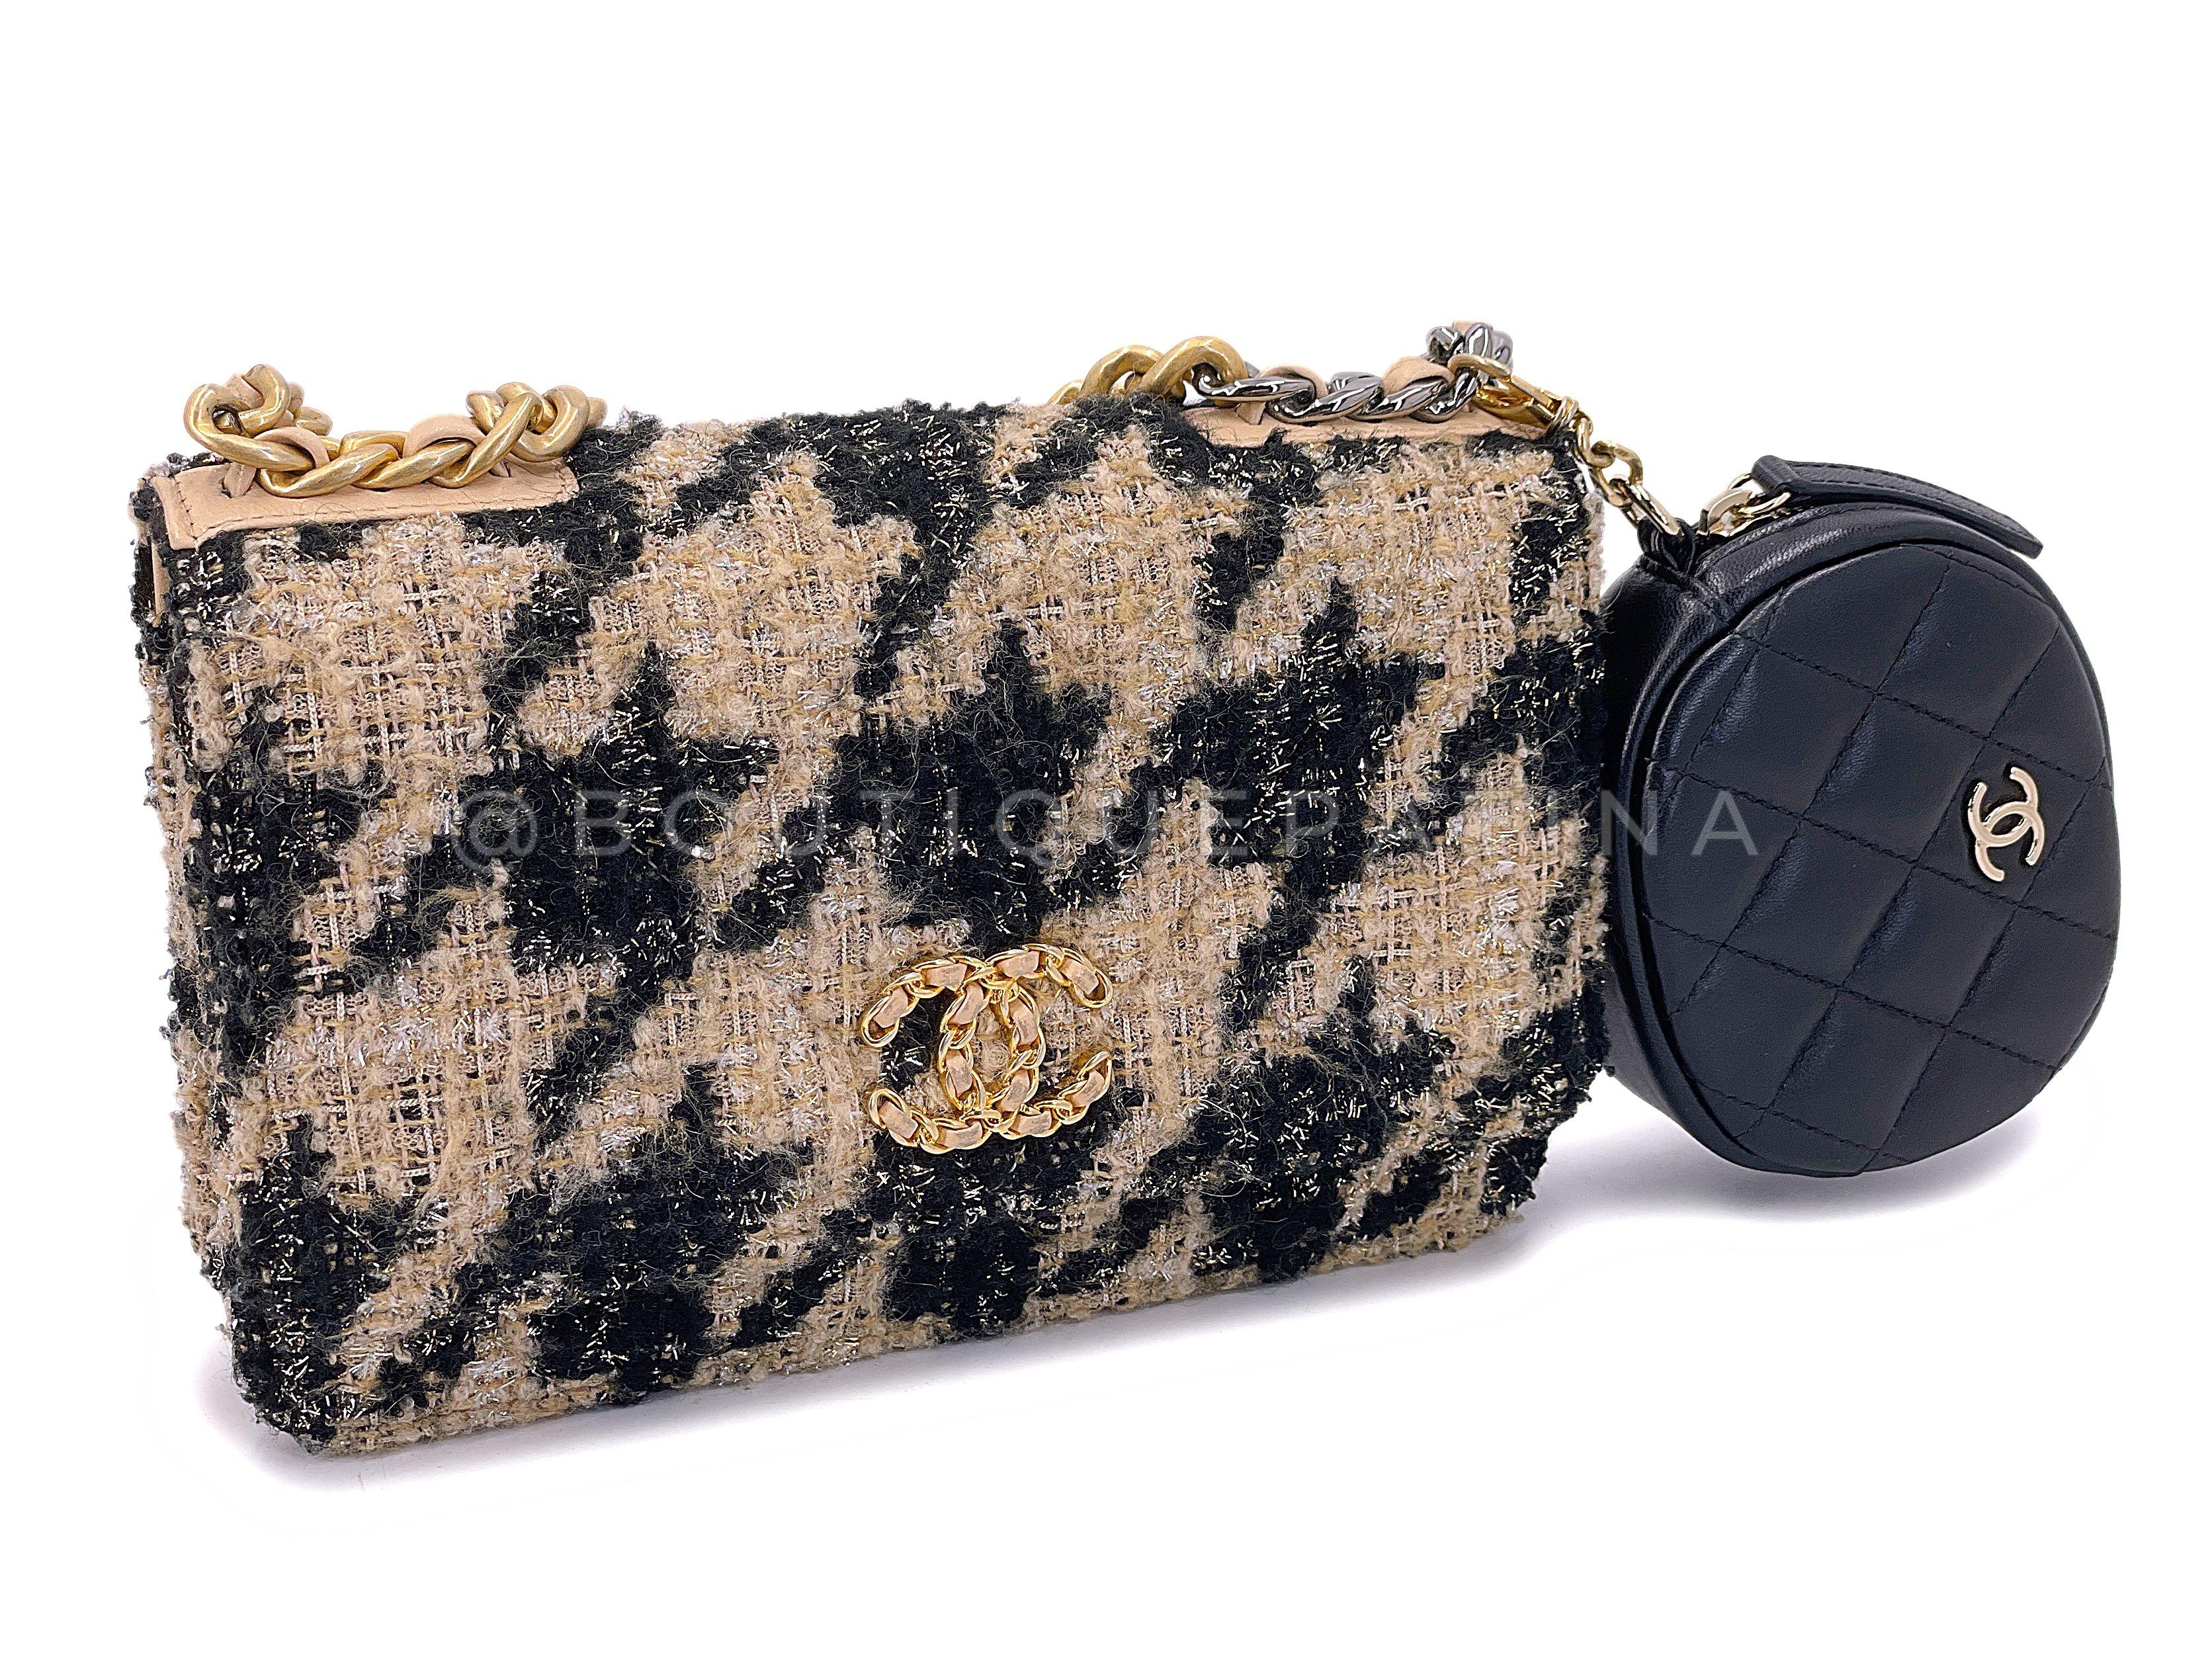 Chanel 19 19K Beige-Black Houndstooth Wallet on Chain WOC Bag Set 67757 In Excellent Condition For Sale In Costa Mesa, CA